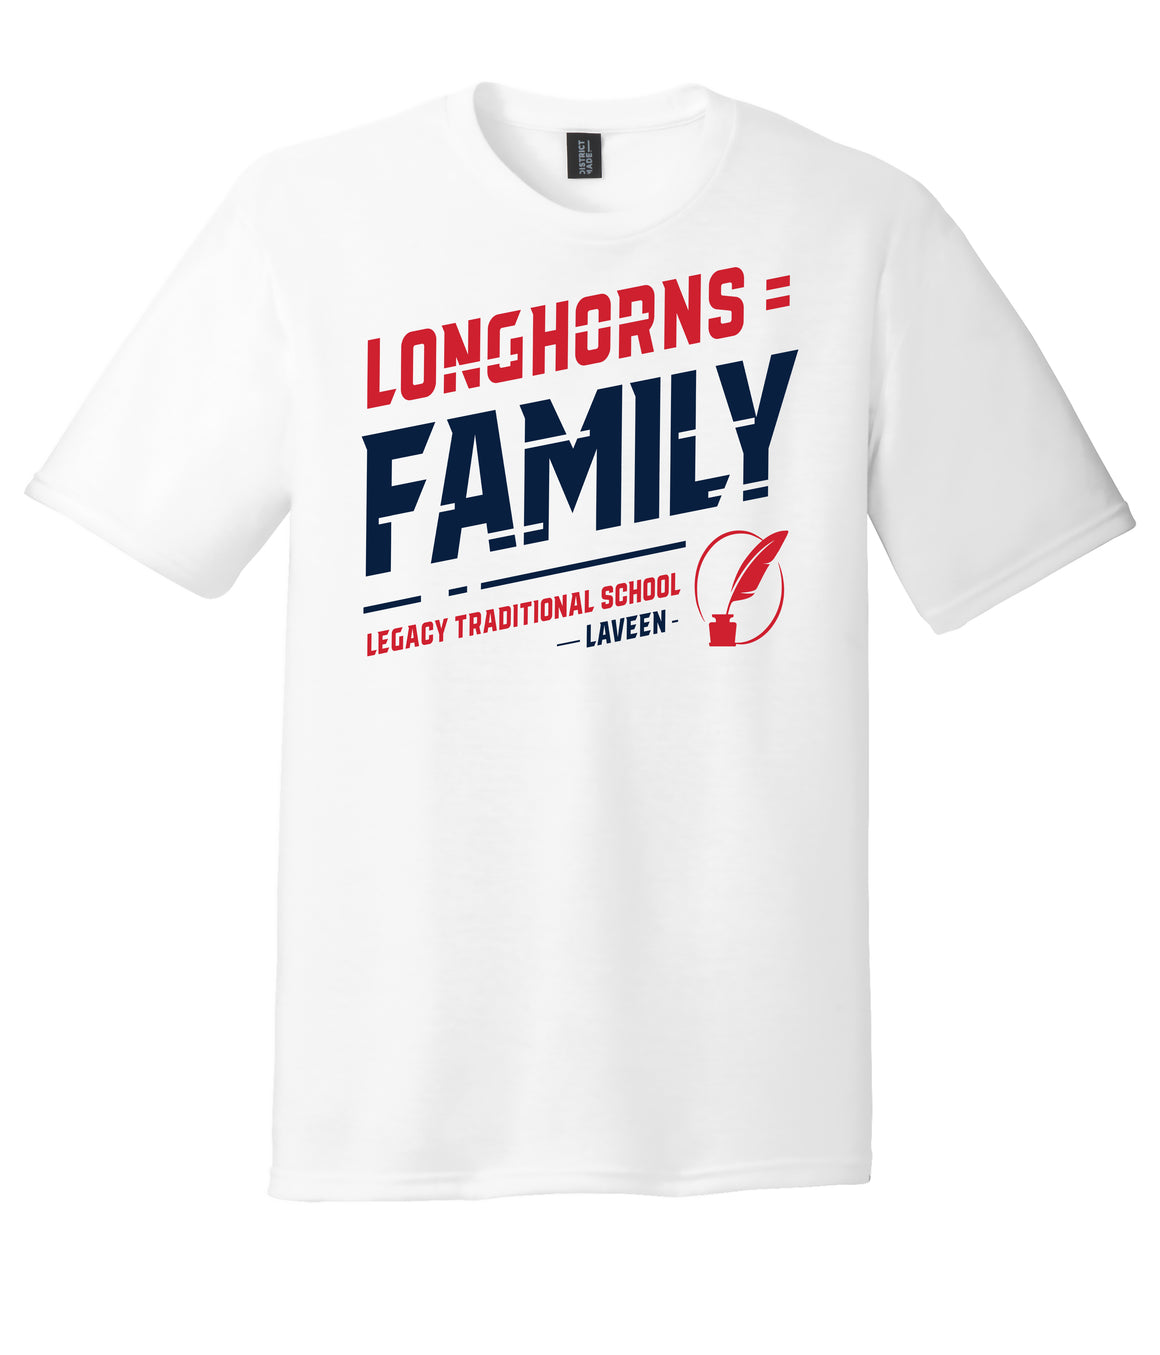 Legacy Traditional School Laveen - White Spirit Day Shirt w/Family